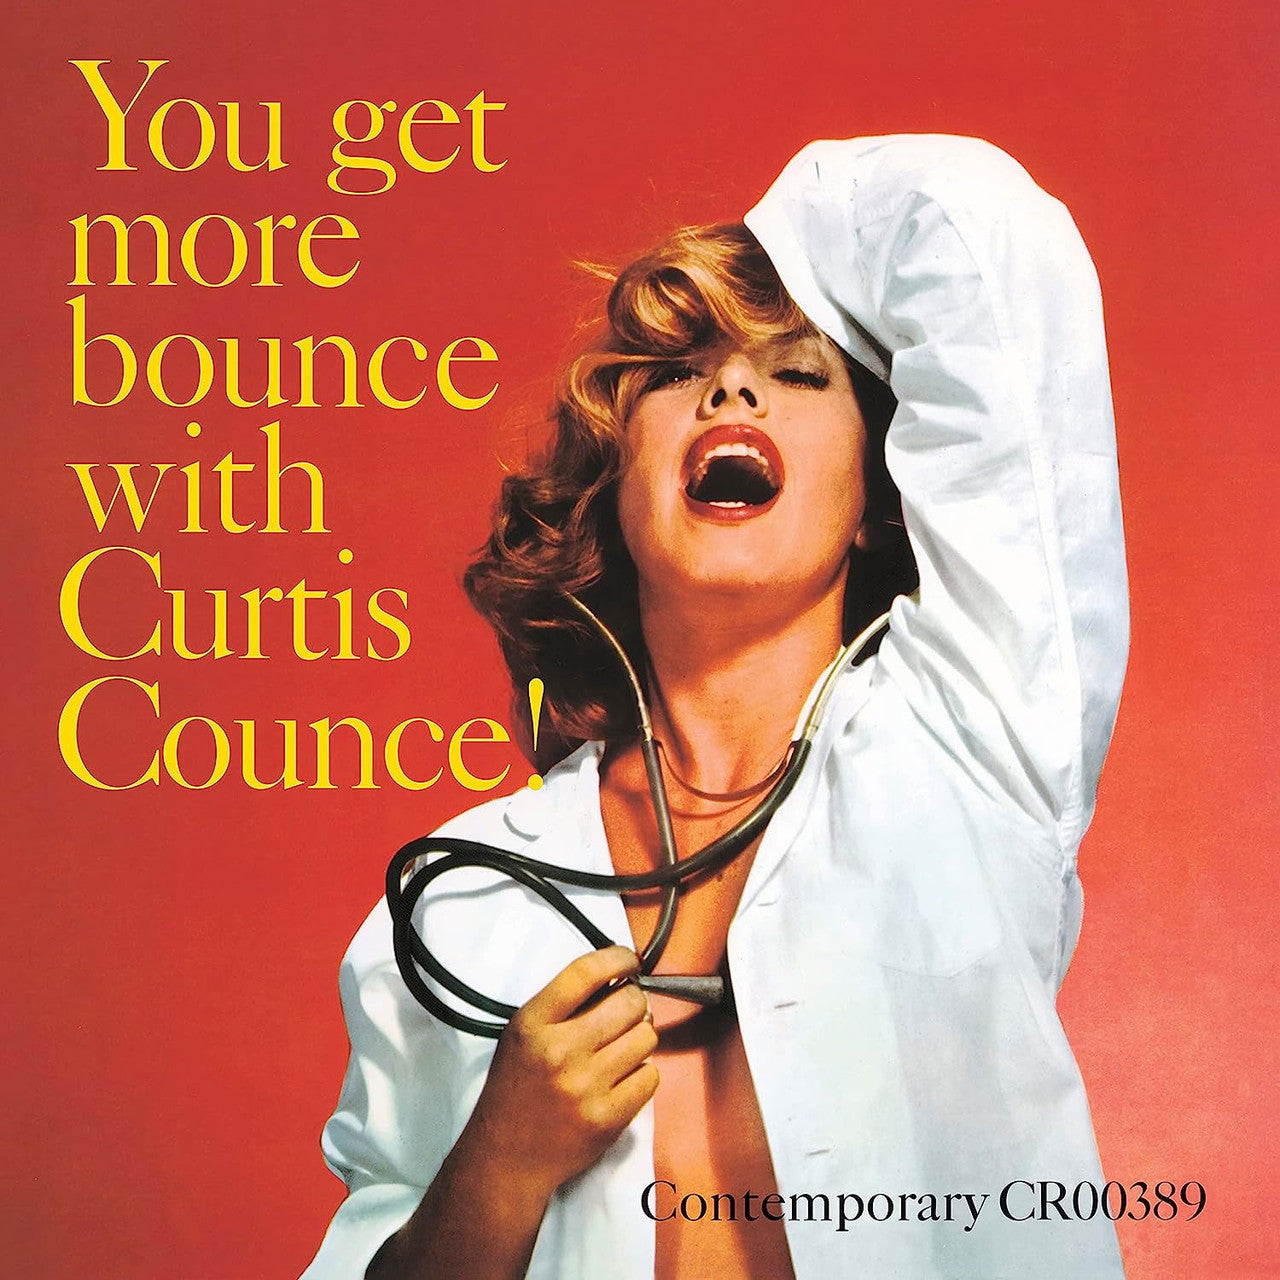 Curtis Counce - You Get More Bounce with Curtis Counce! - Contemporary LP